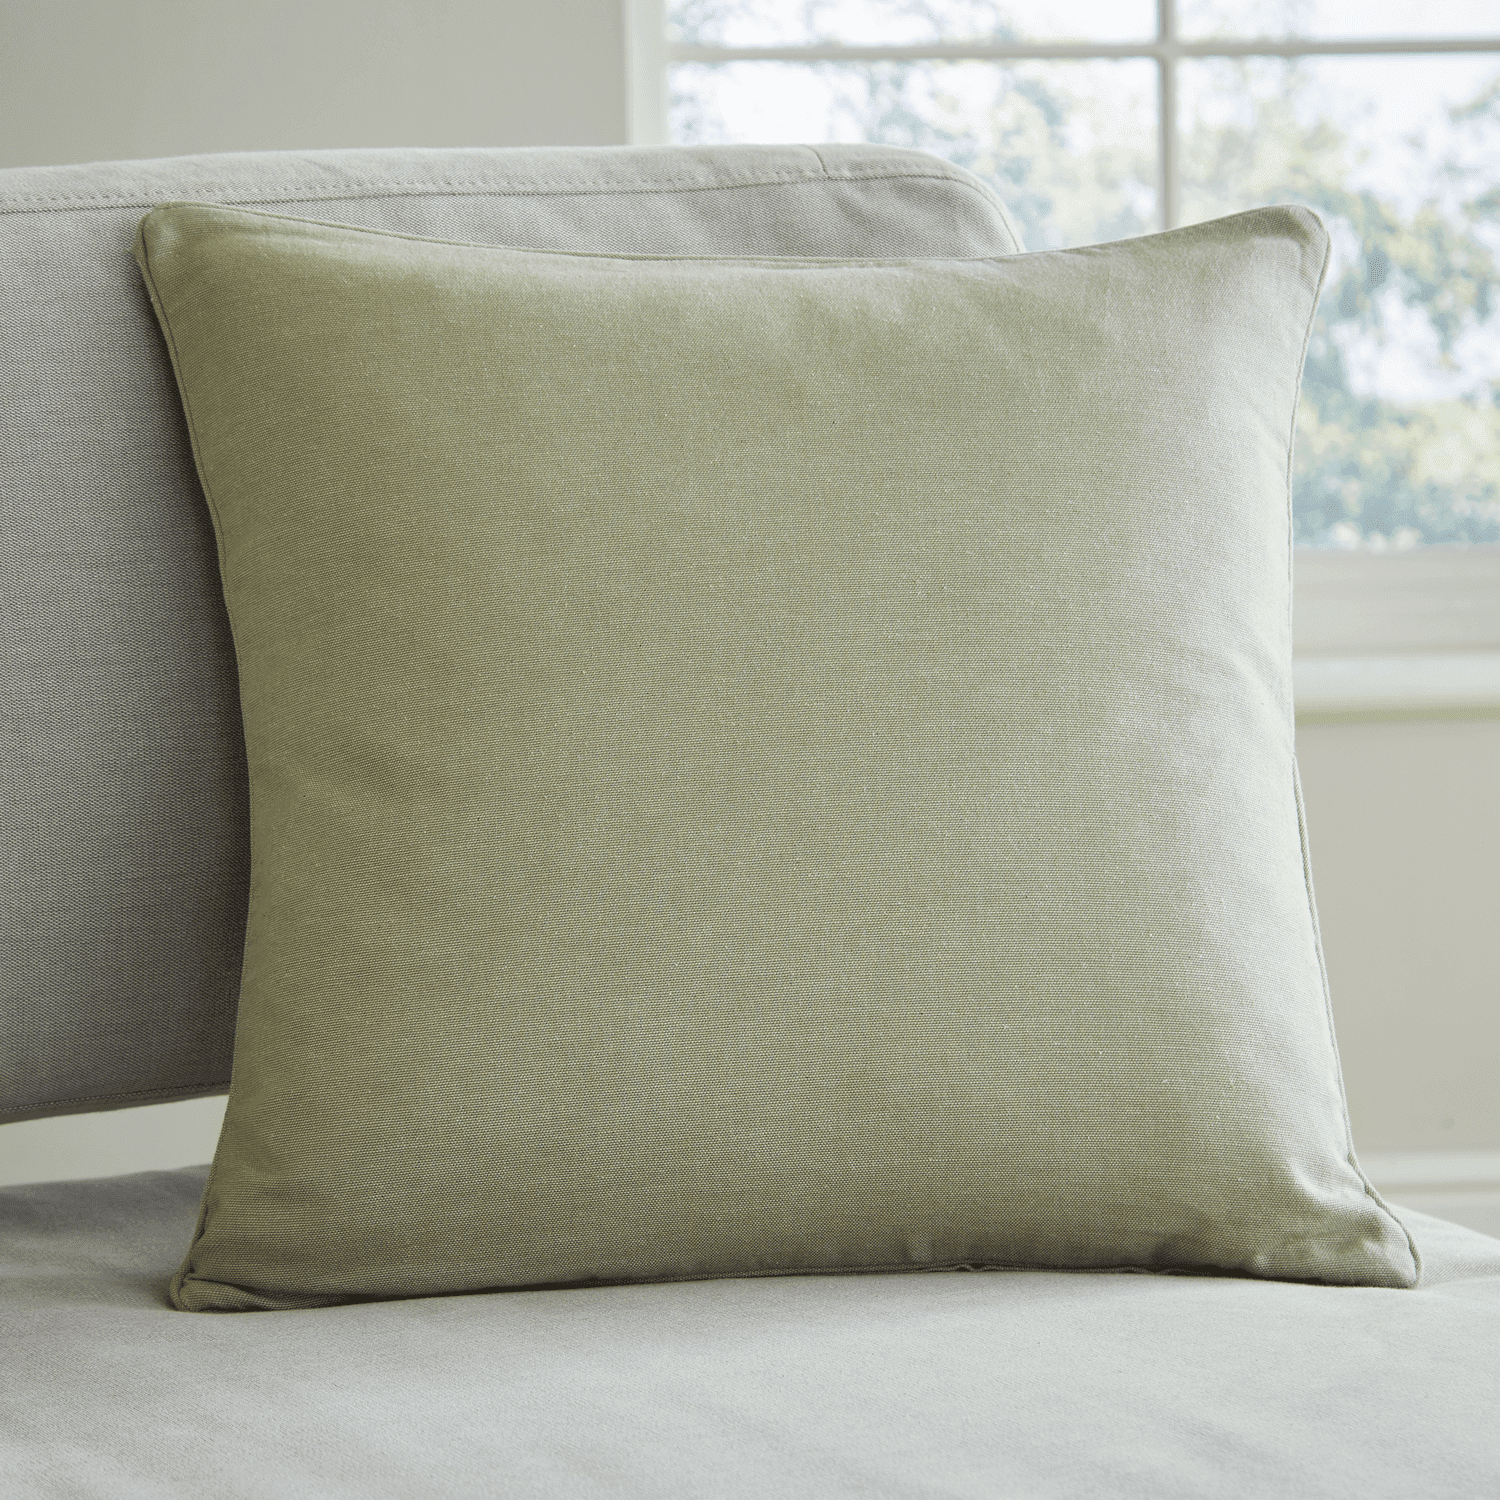 Catherine Lansfield Yarn Dyed 100% Cotton Chambray Cushion Cover - Sage 1 Shaws Department Stores